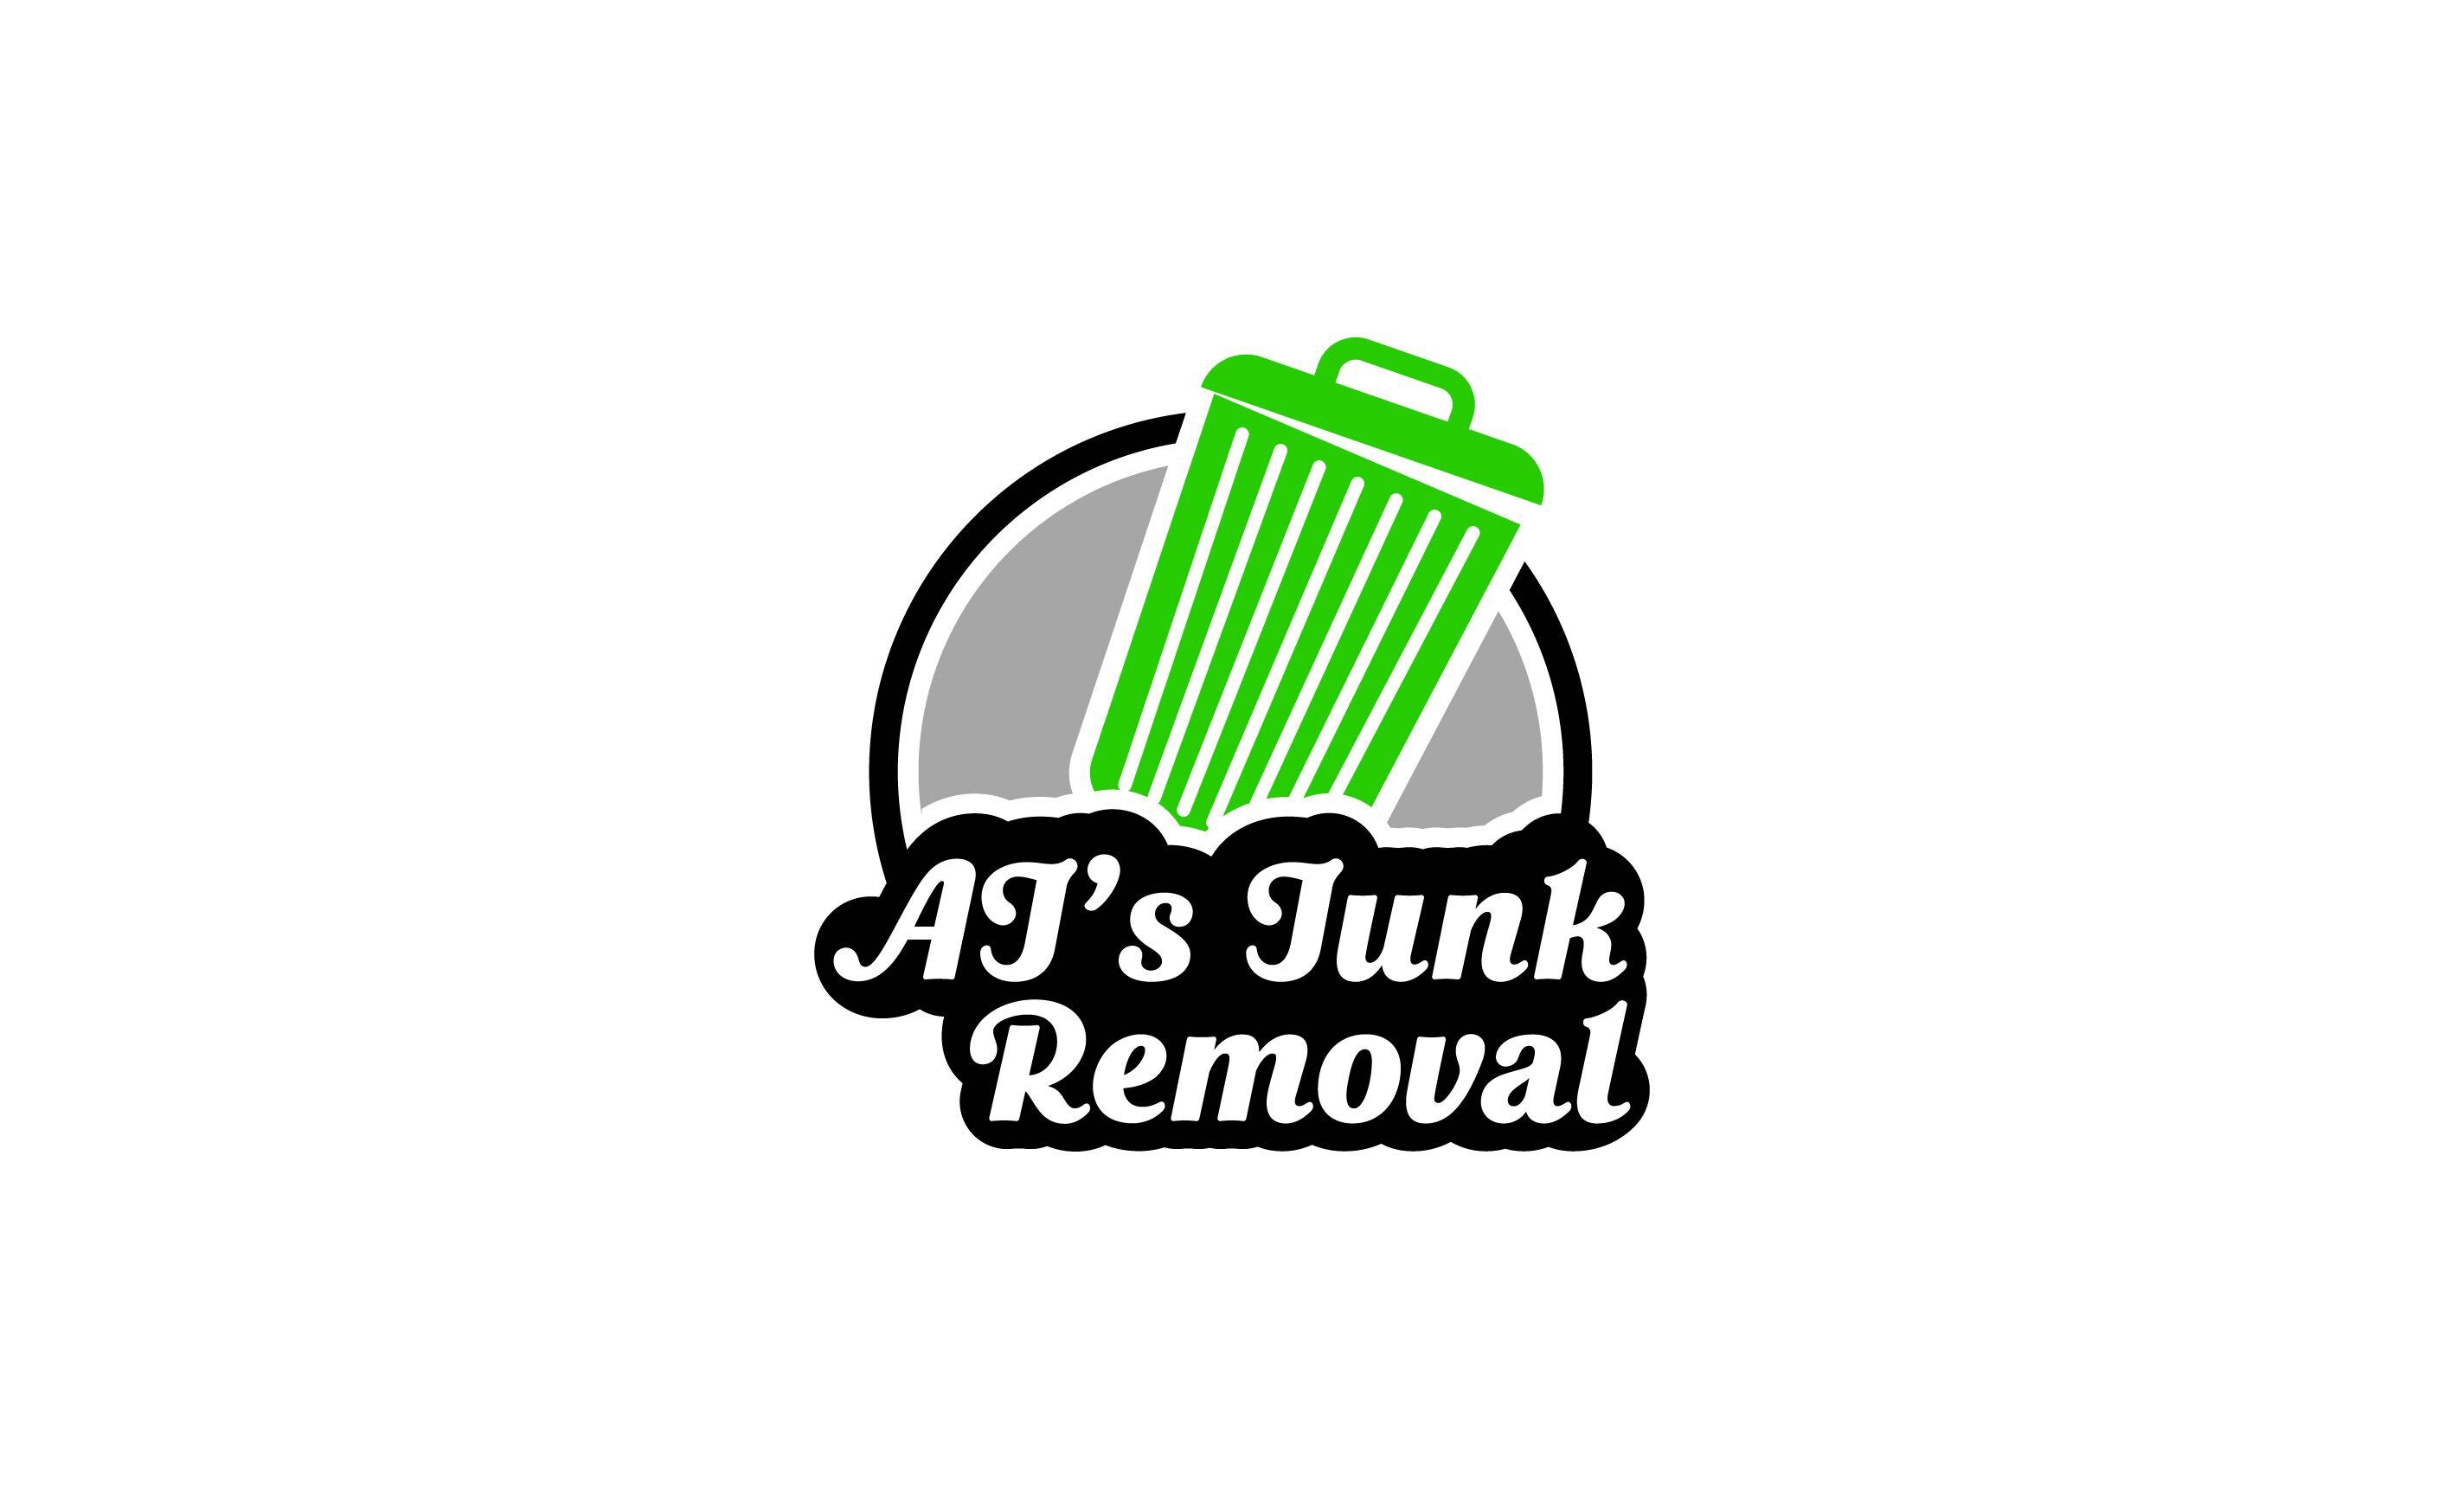 AJ's Junk Removal logo depicting a clean and professional junk removal service in Bridgeport.